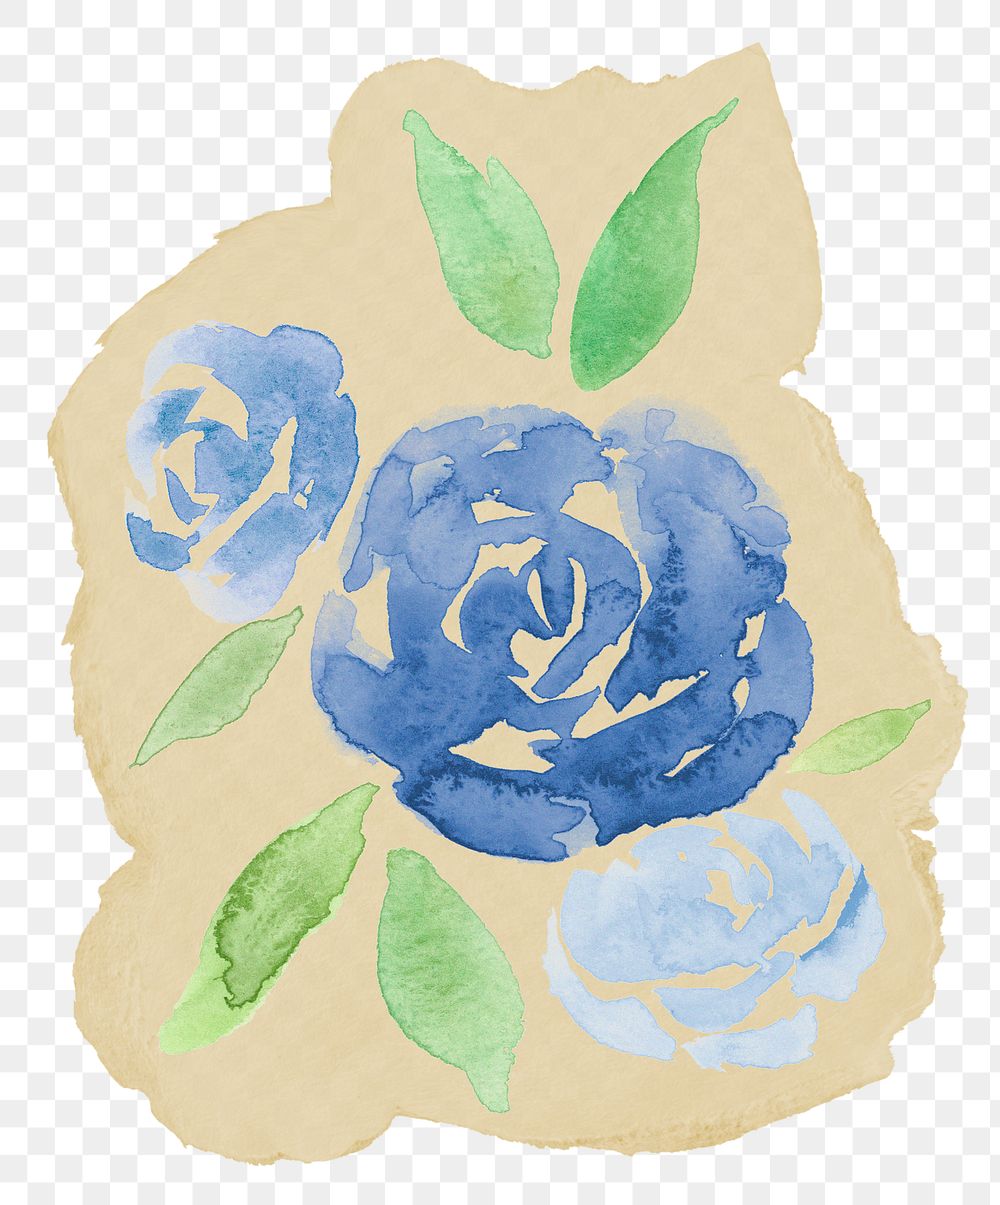 Watercolor rose flower png sticker, ripped paper, transparent background